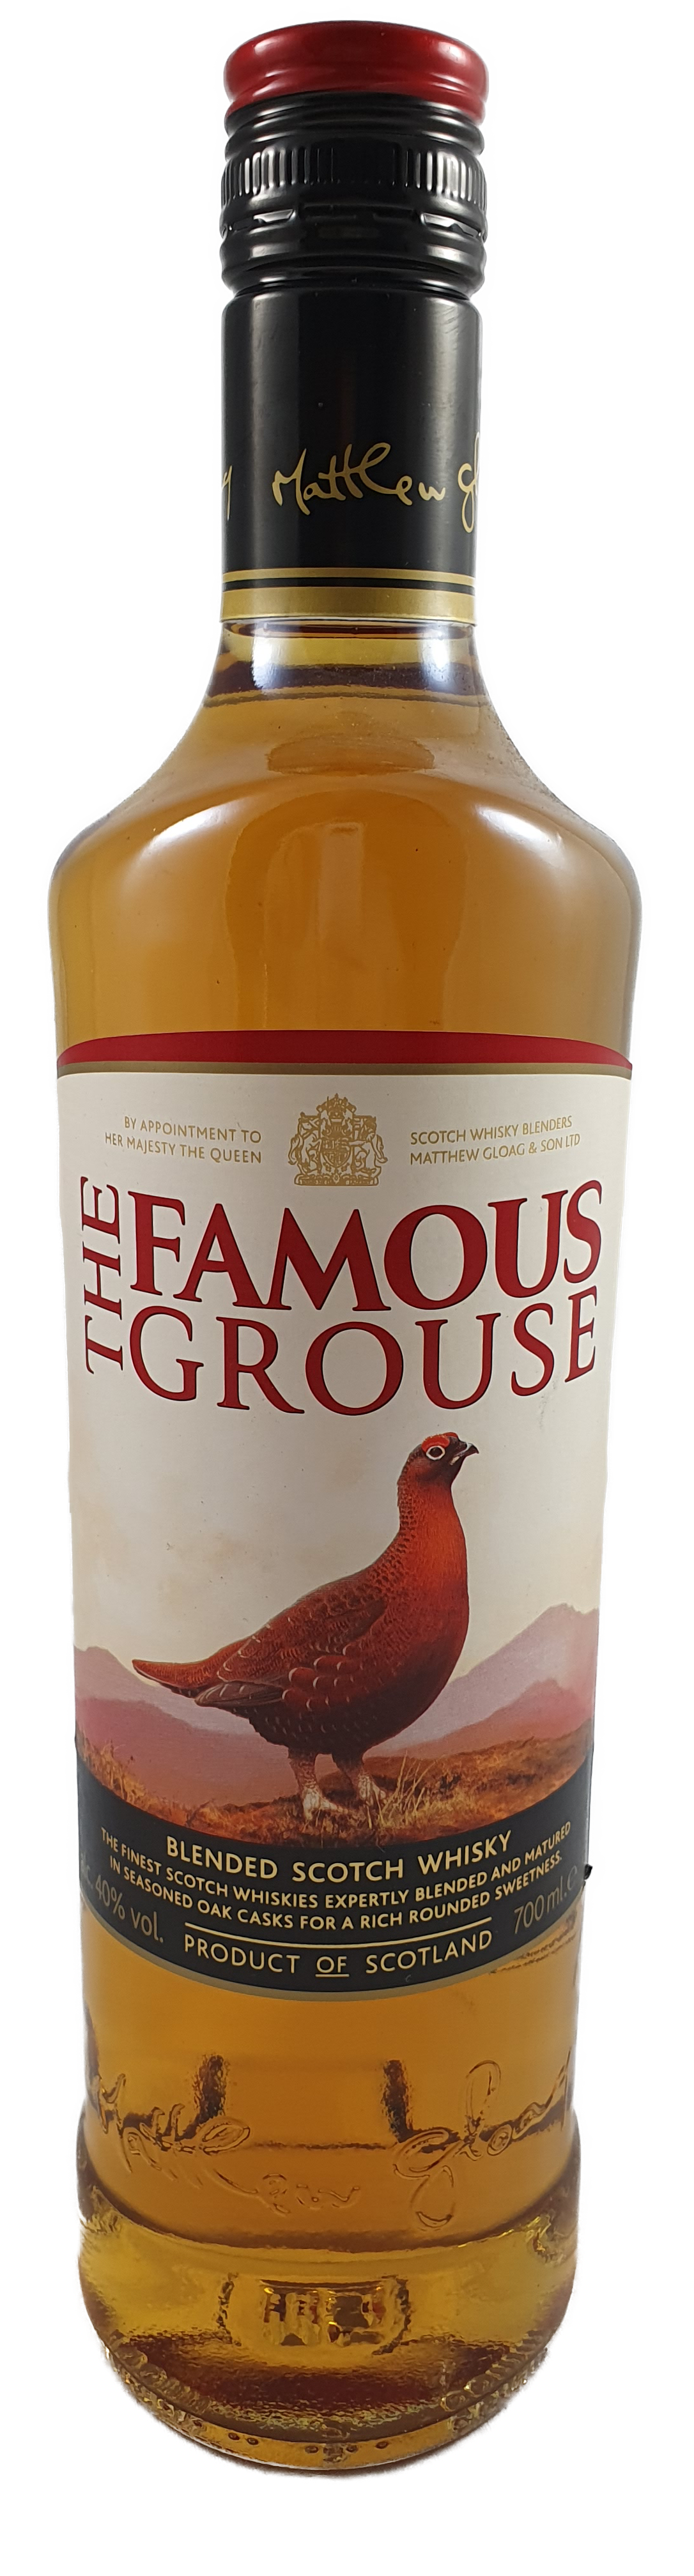 The Famouse Grouse Smoky Black Whisky 40 % 0.7L